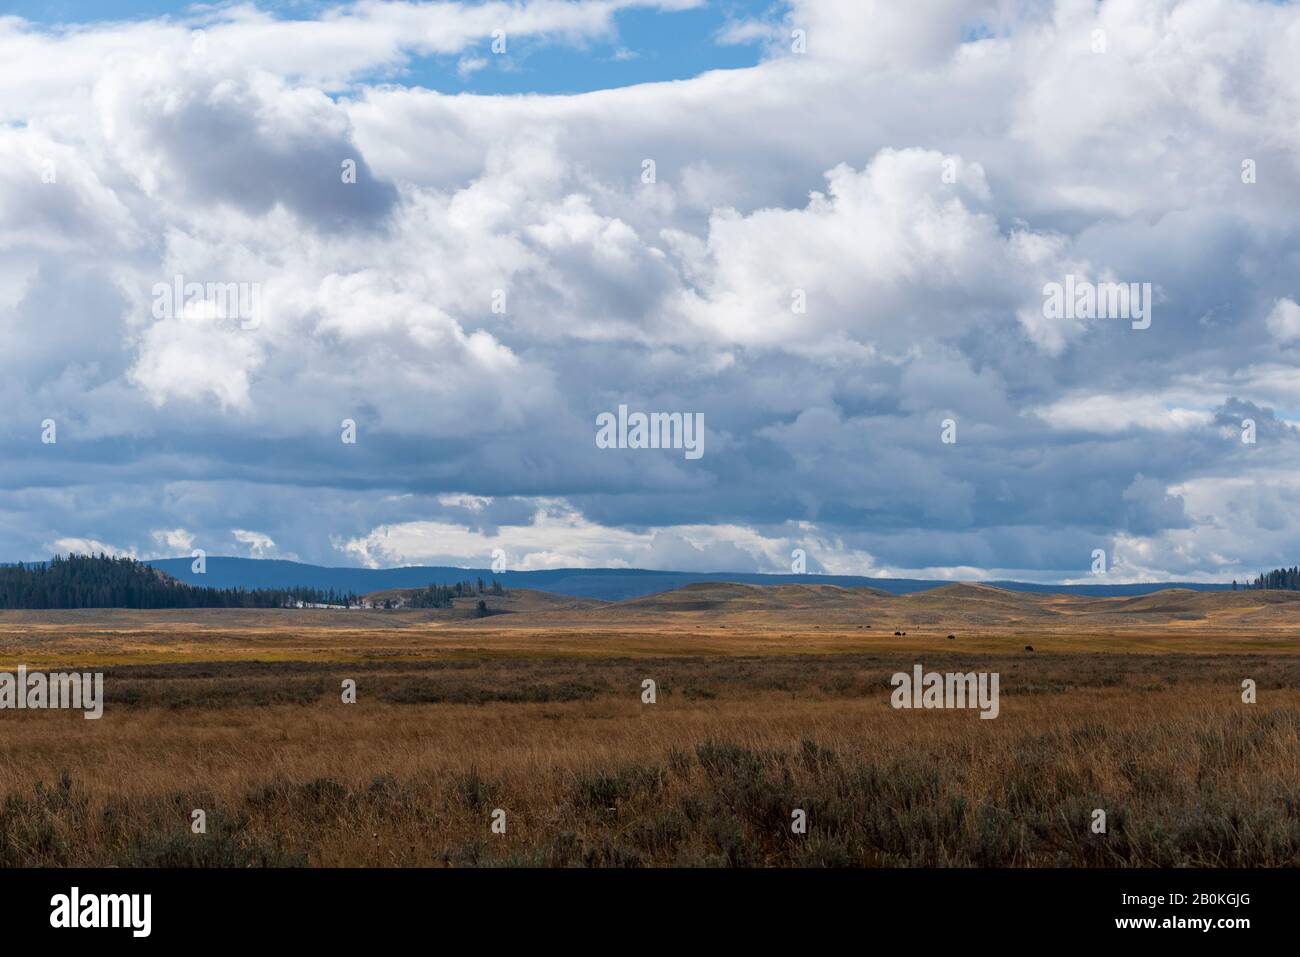 Golden grassy valley with forested hill and mountains beyond under blue skies with white fluffy clouds. Stock Photo